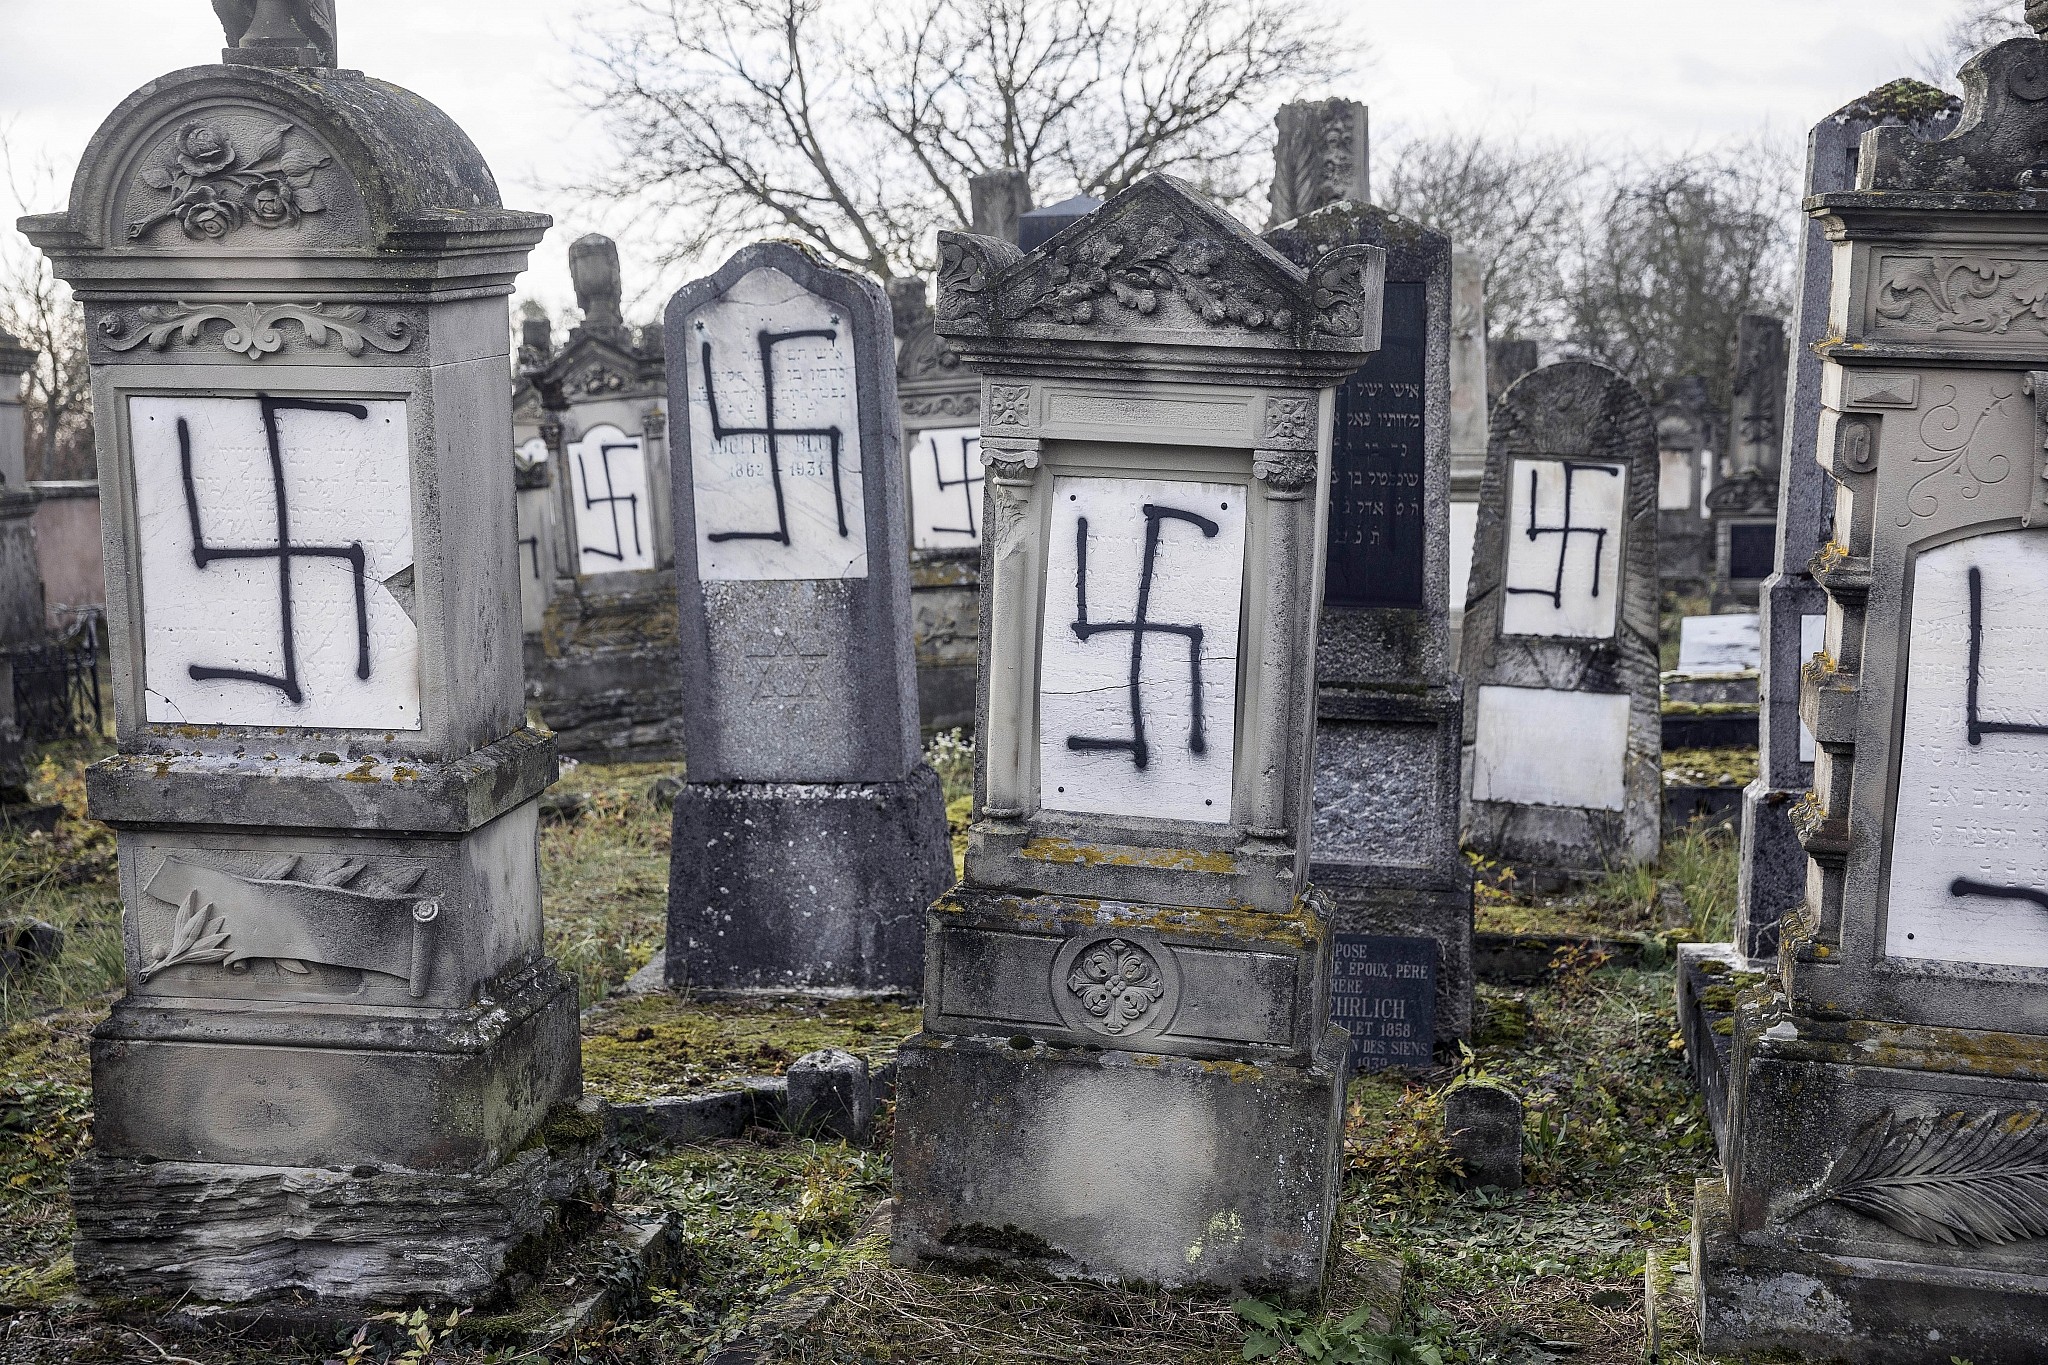 A Jewish cemetery in France was vandalized with swastikas